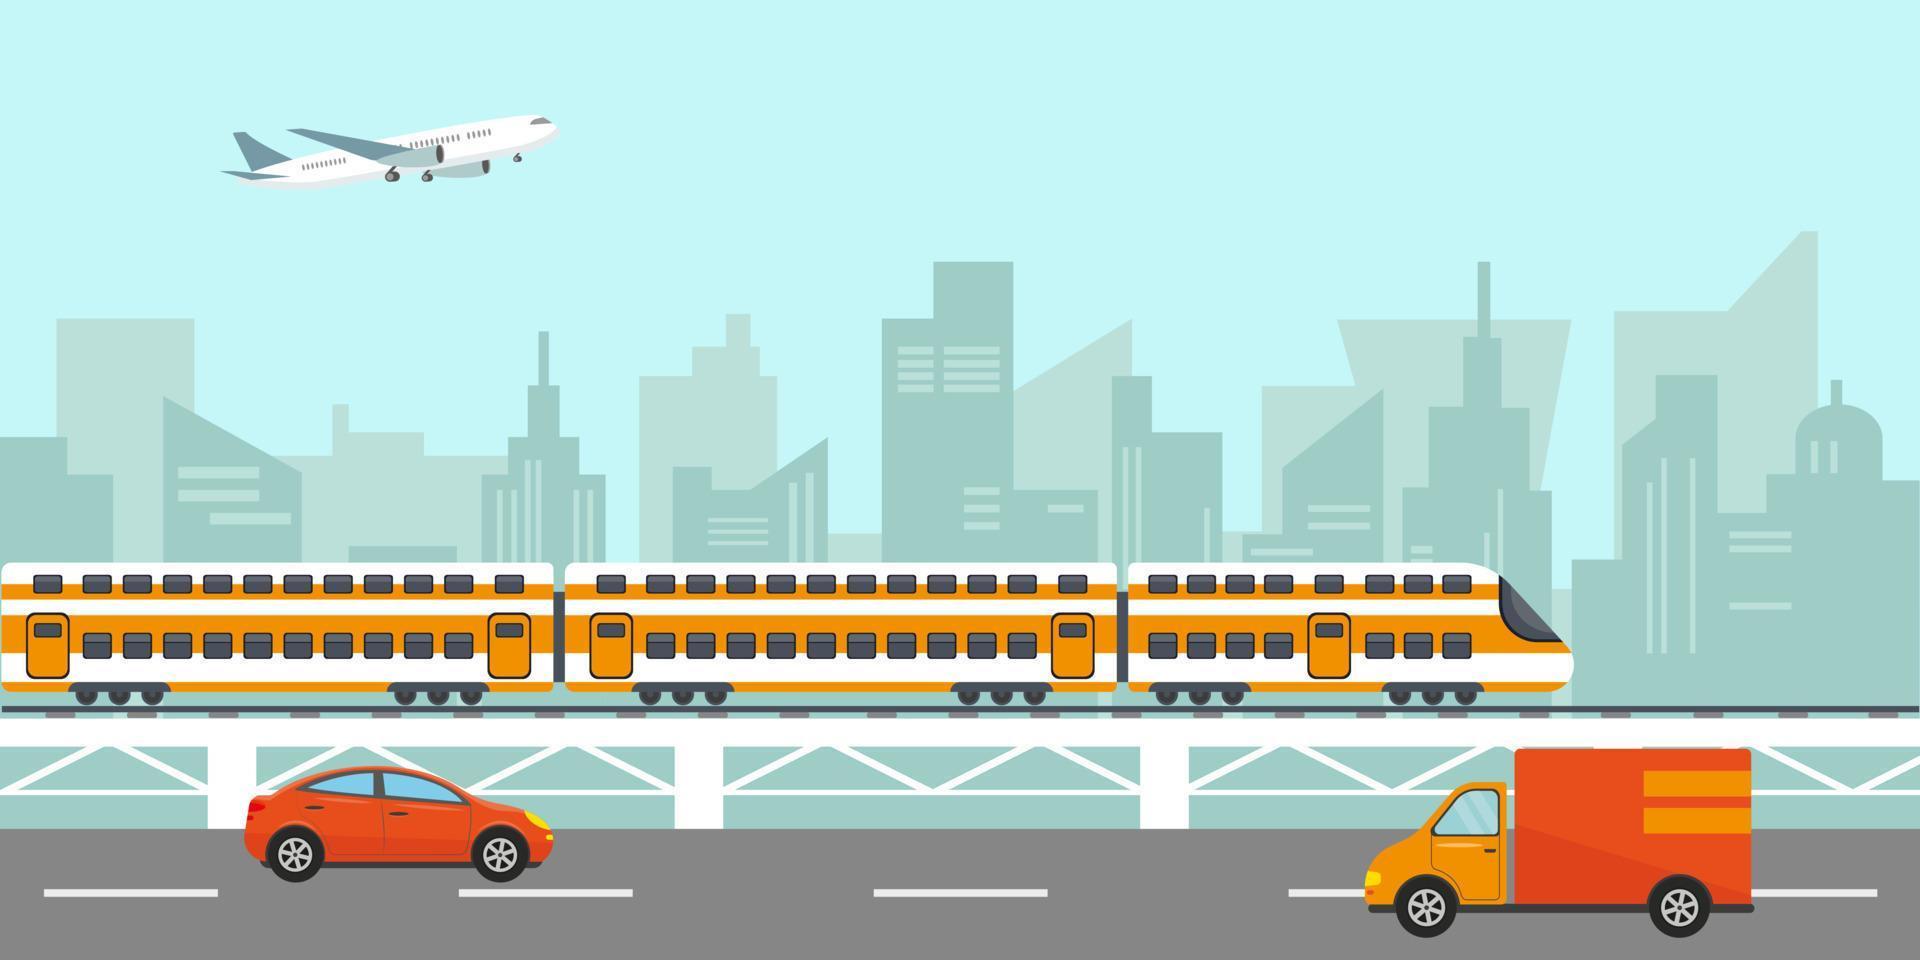 Urban city landscape with buildings, passenger hight speed train on bridge, cars on the road and airplain in the sky. Vector illustration.